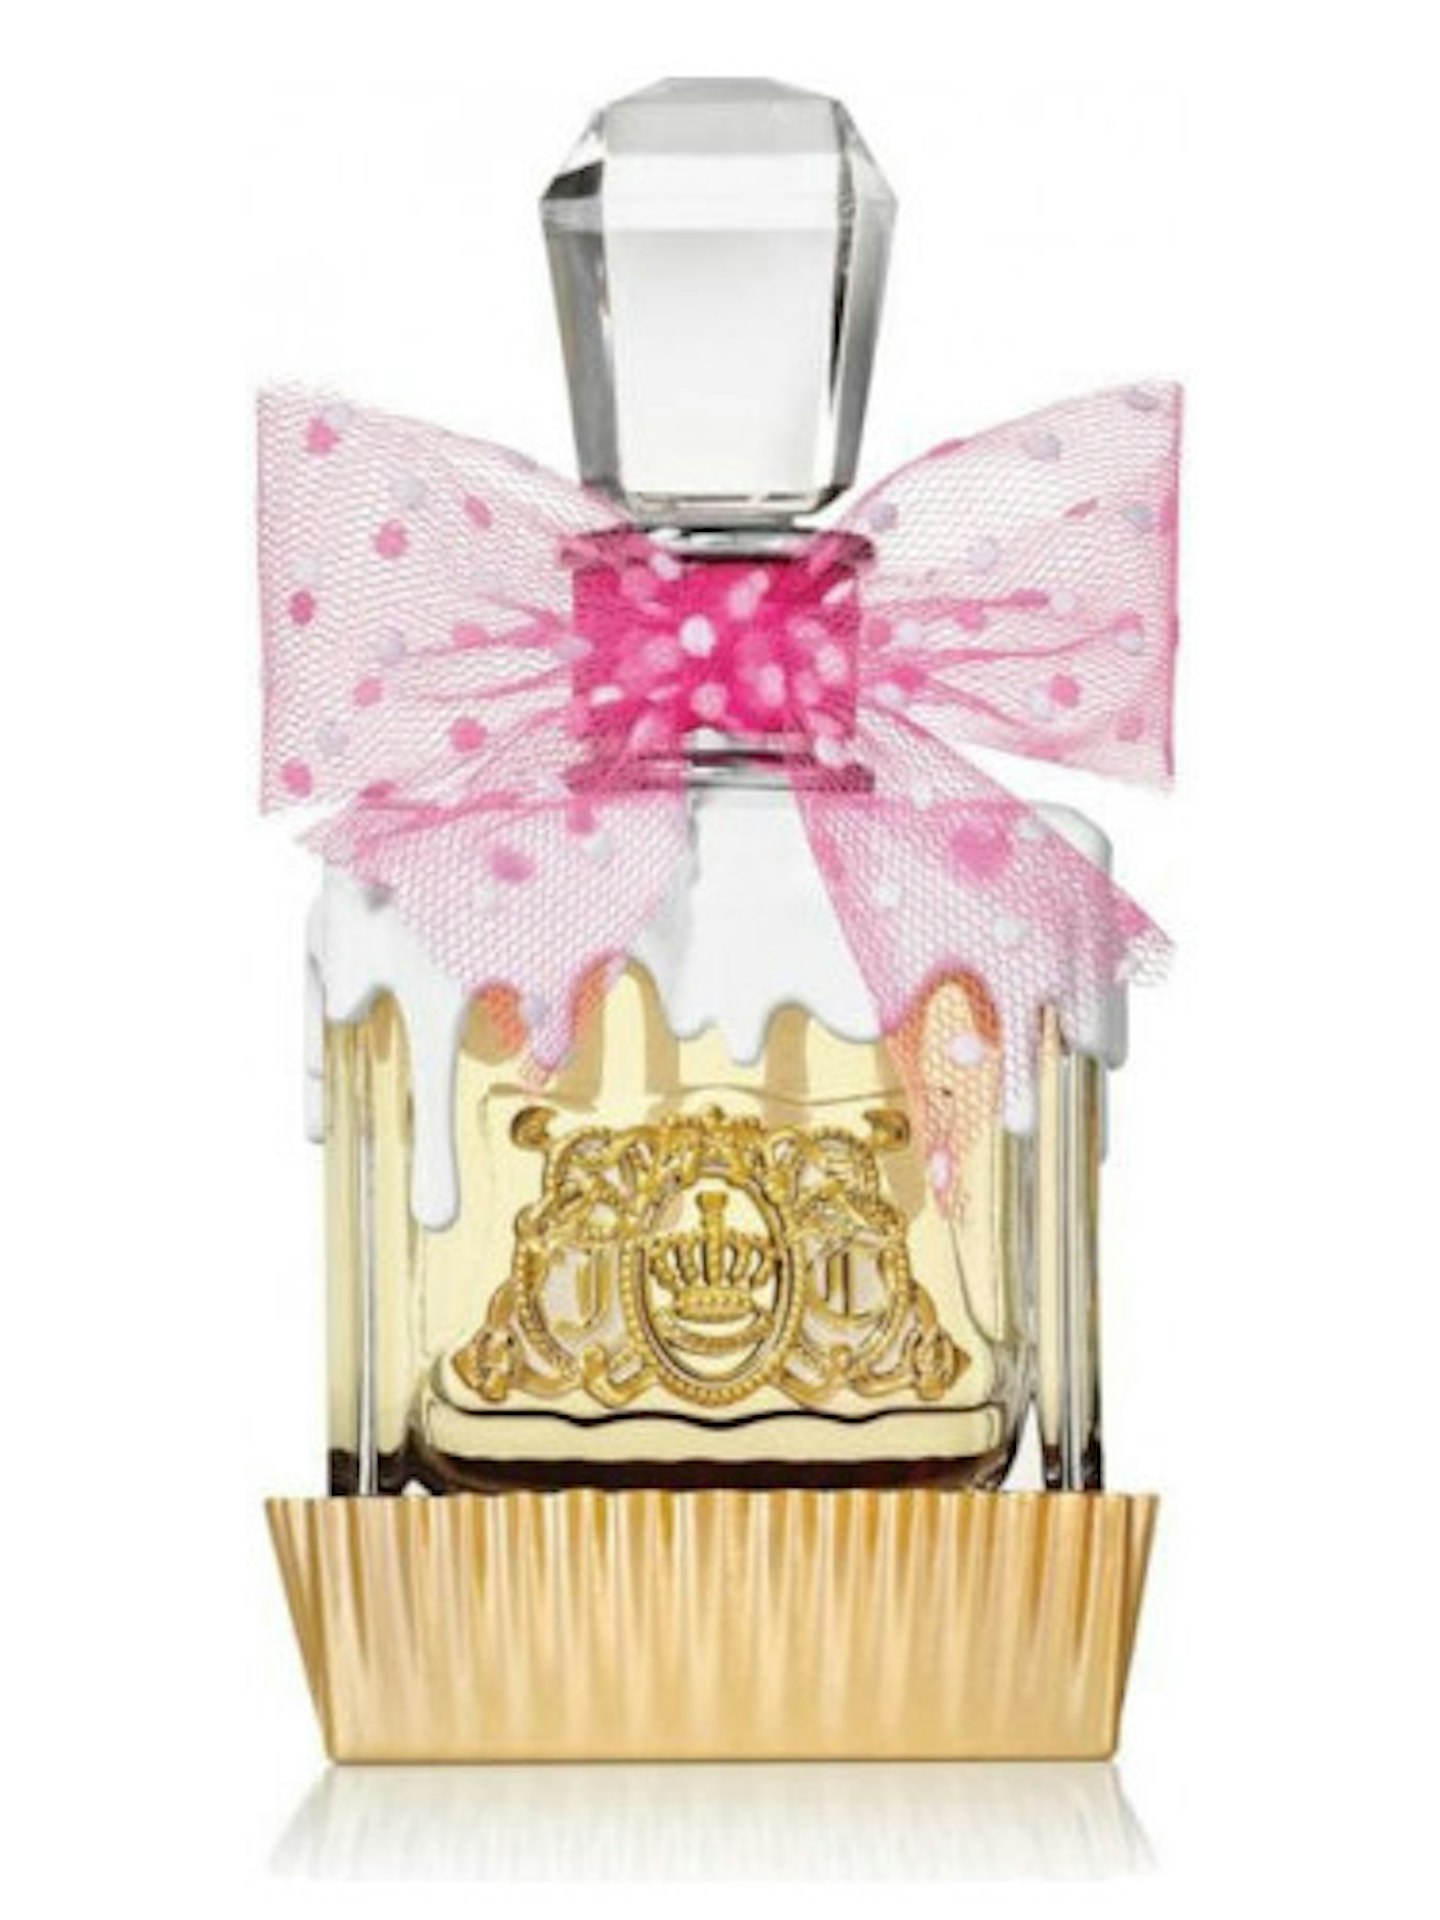 Juicy Couture fragrance